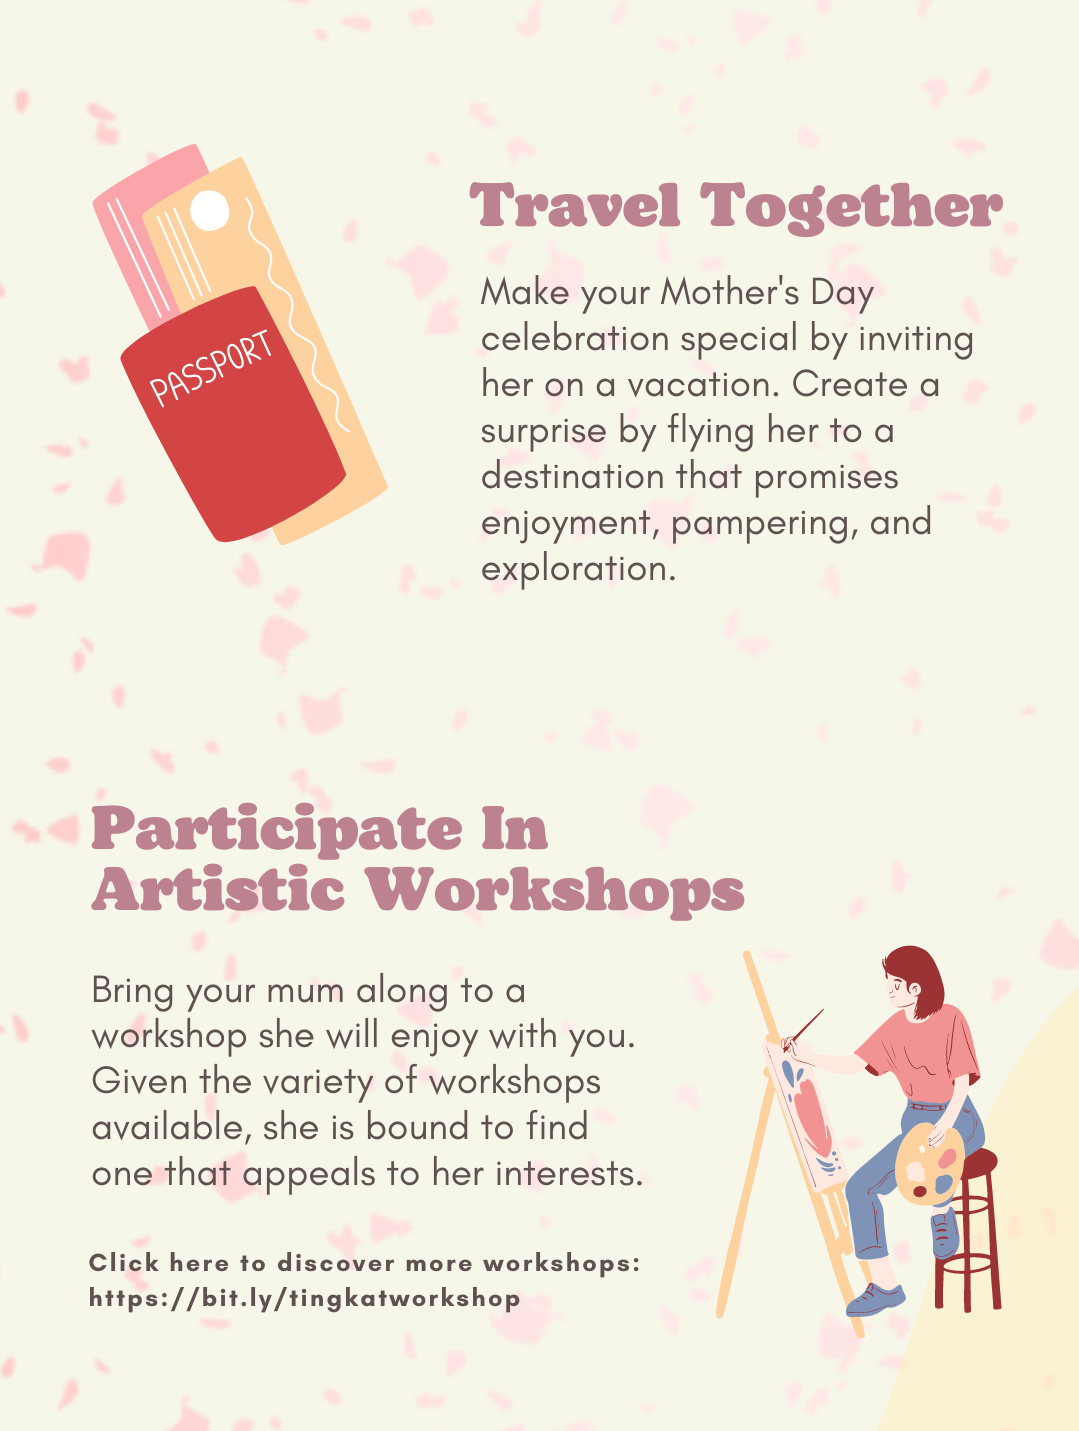 5 Activities To Explore This Mother's Day (2)